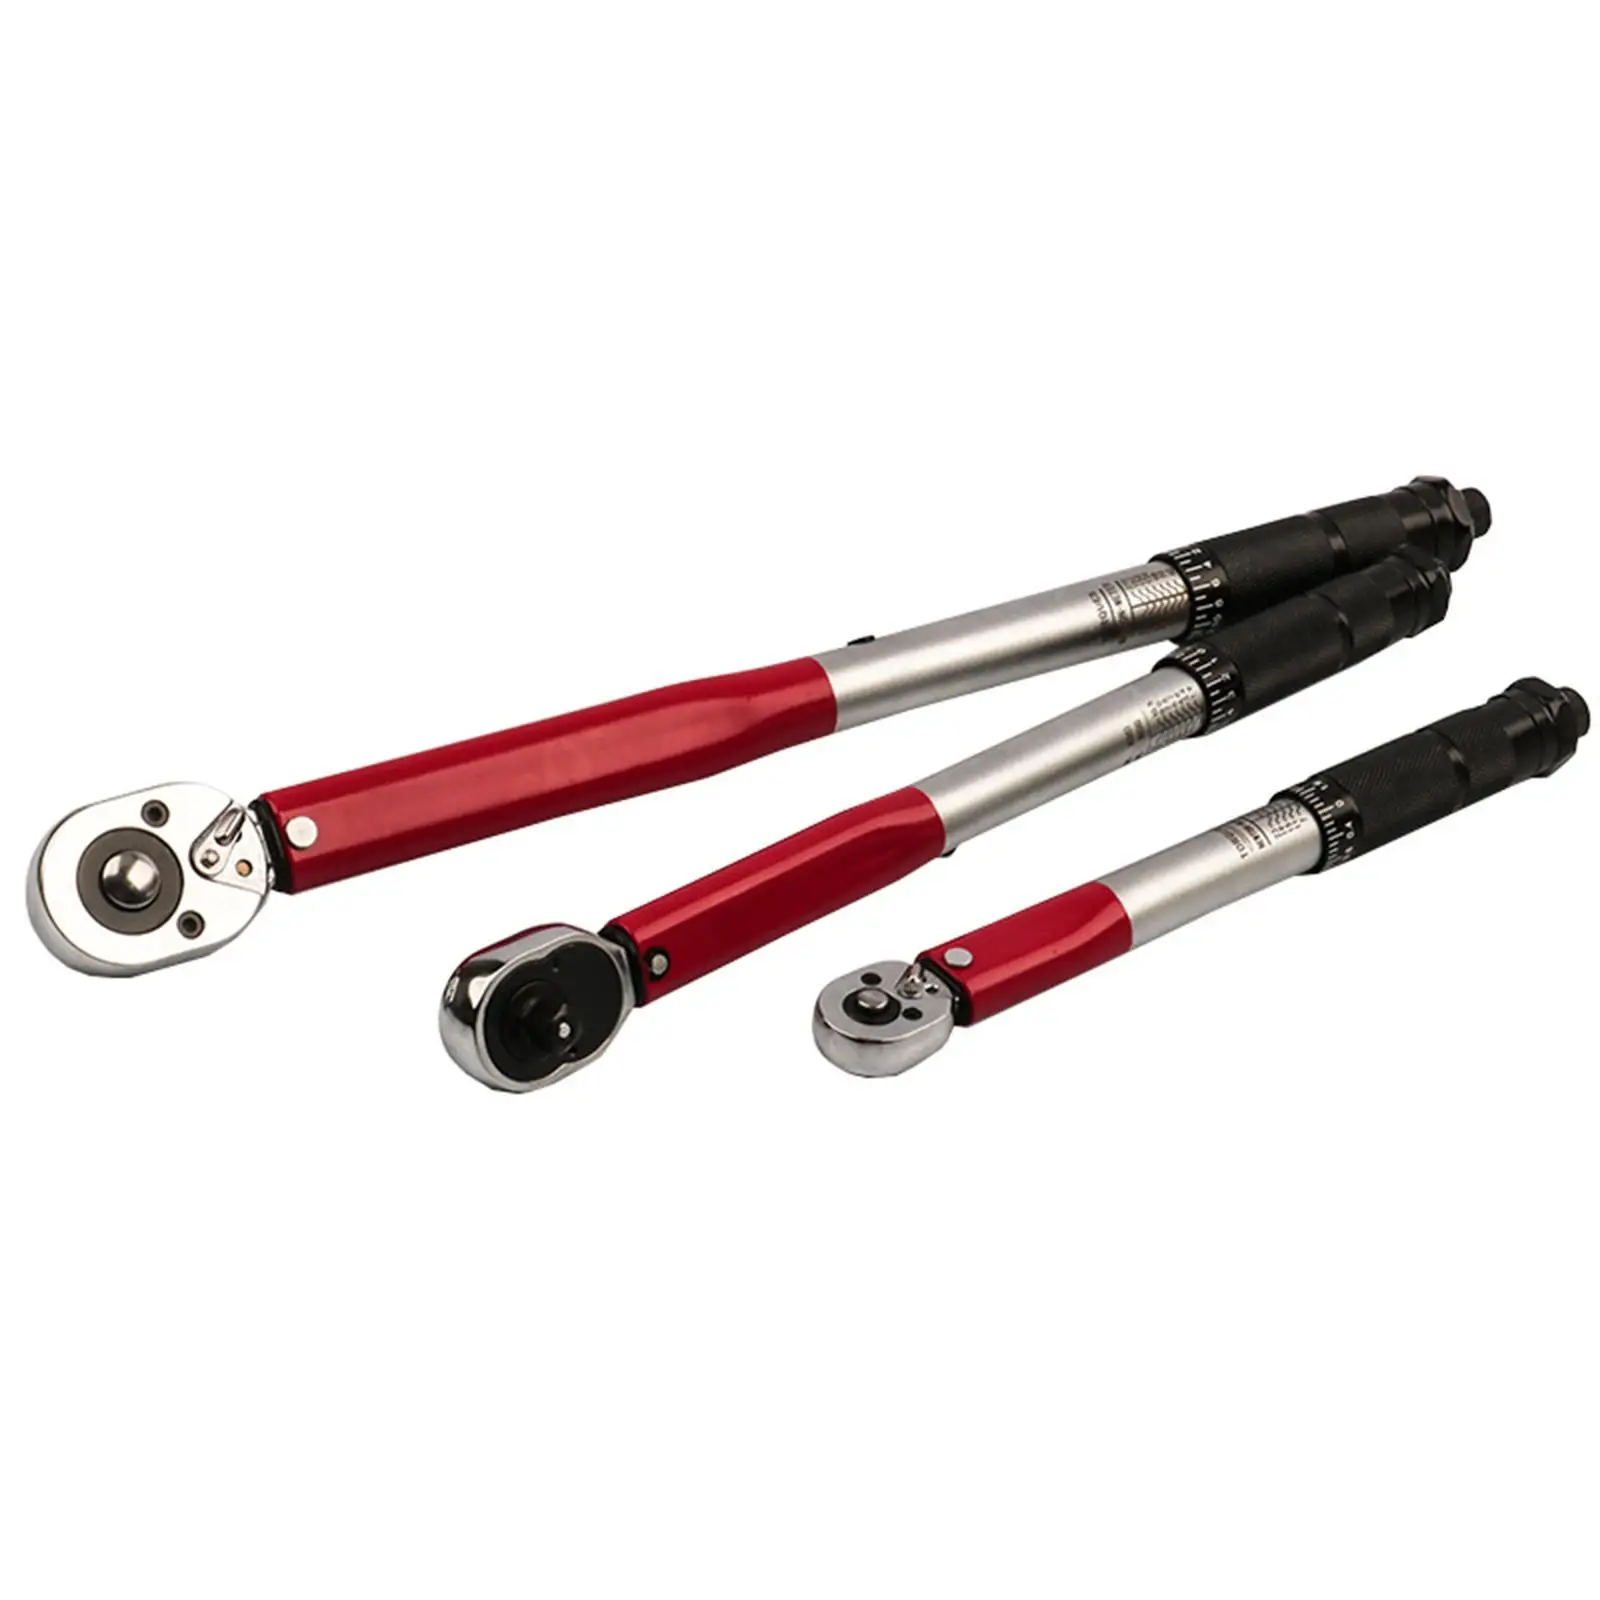 1/4inch 6.35mm Drive Torque Wrench Hand Spanner with Storage Box 5-25nm Adjustable for Bike, Car Repair Multifunctional